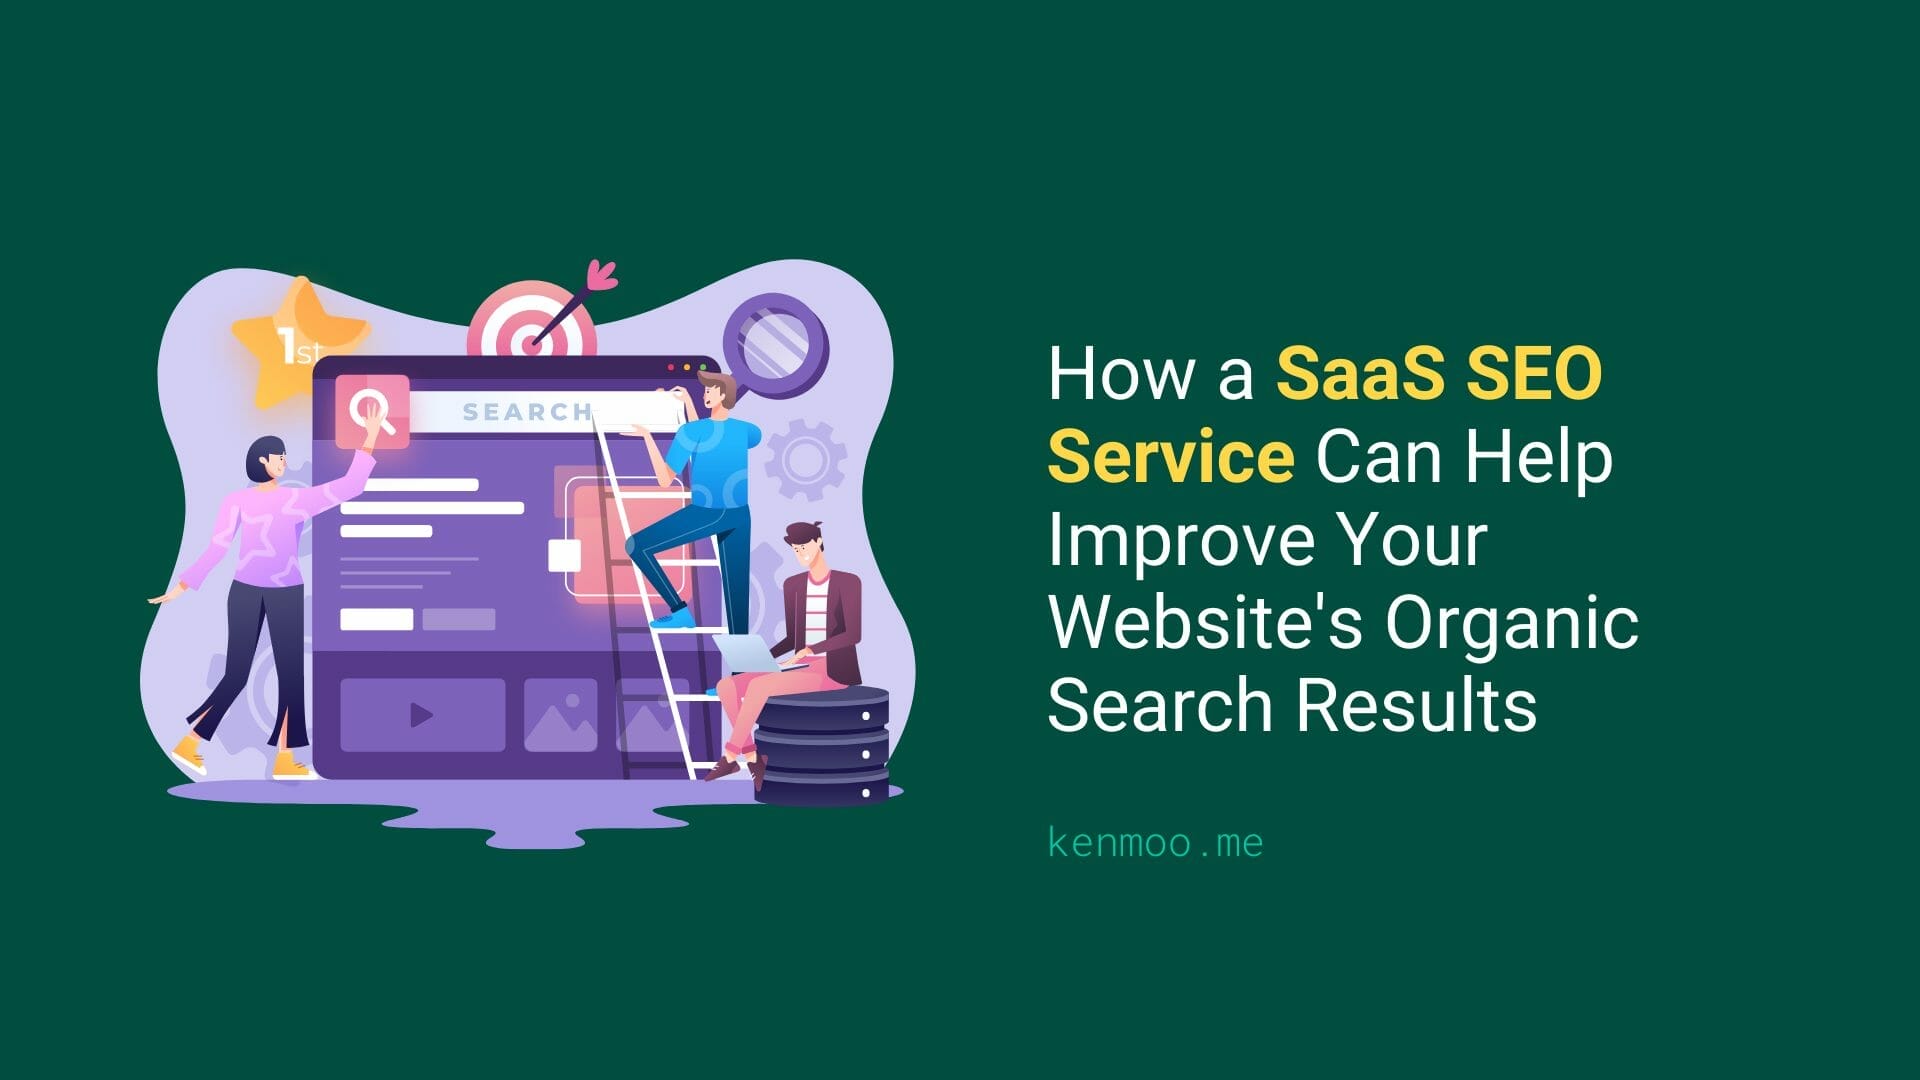 How a SaaS SEO Service Can Help Improve Your Website’s Organic Search Results